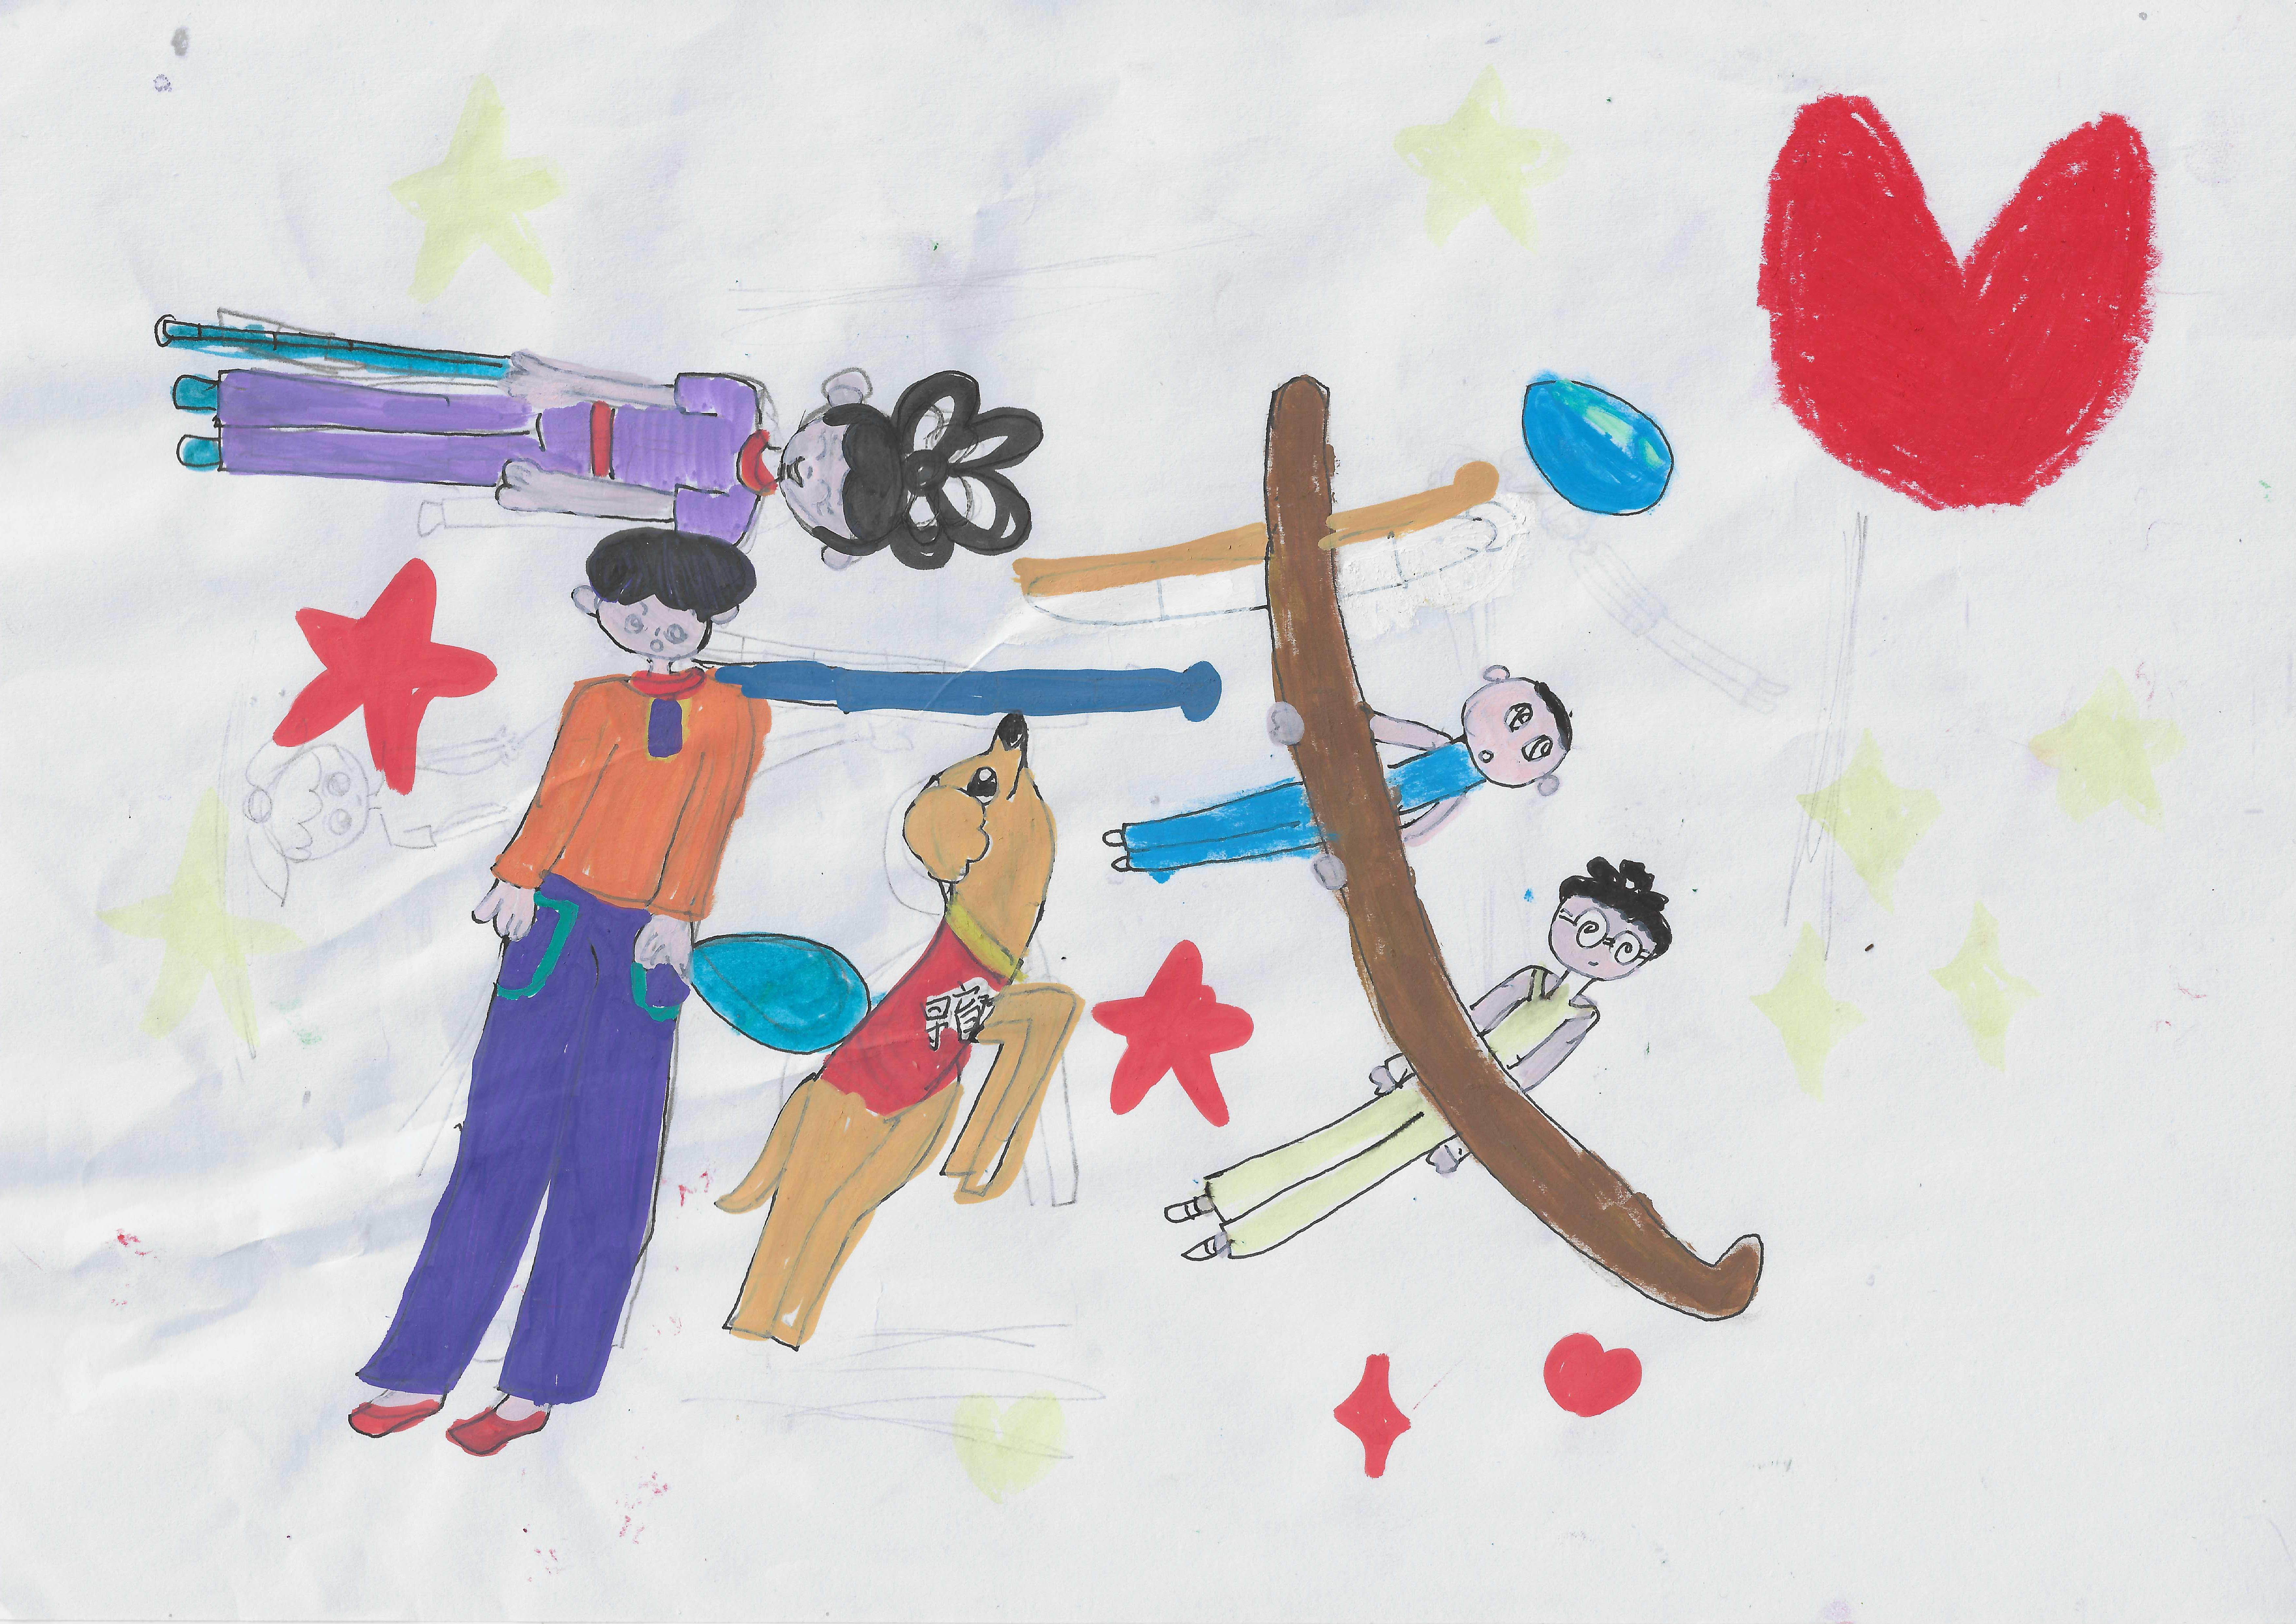 A child's drawing that makes up the Chinese character for Disability out of a seriesof figures: (Left to right: a person wearing purple on their side above a person with orange top and blue-ish pants; a dog jumping with a line above its note; two figures on their side turned slightly left holding on to large brown object. Stars and hearts also appear in the image.